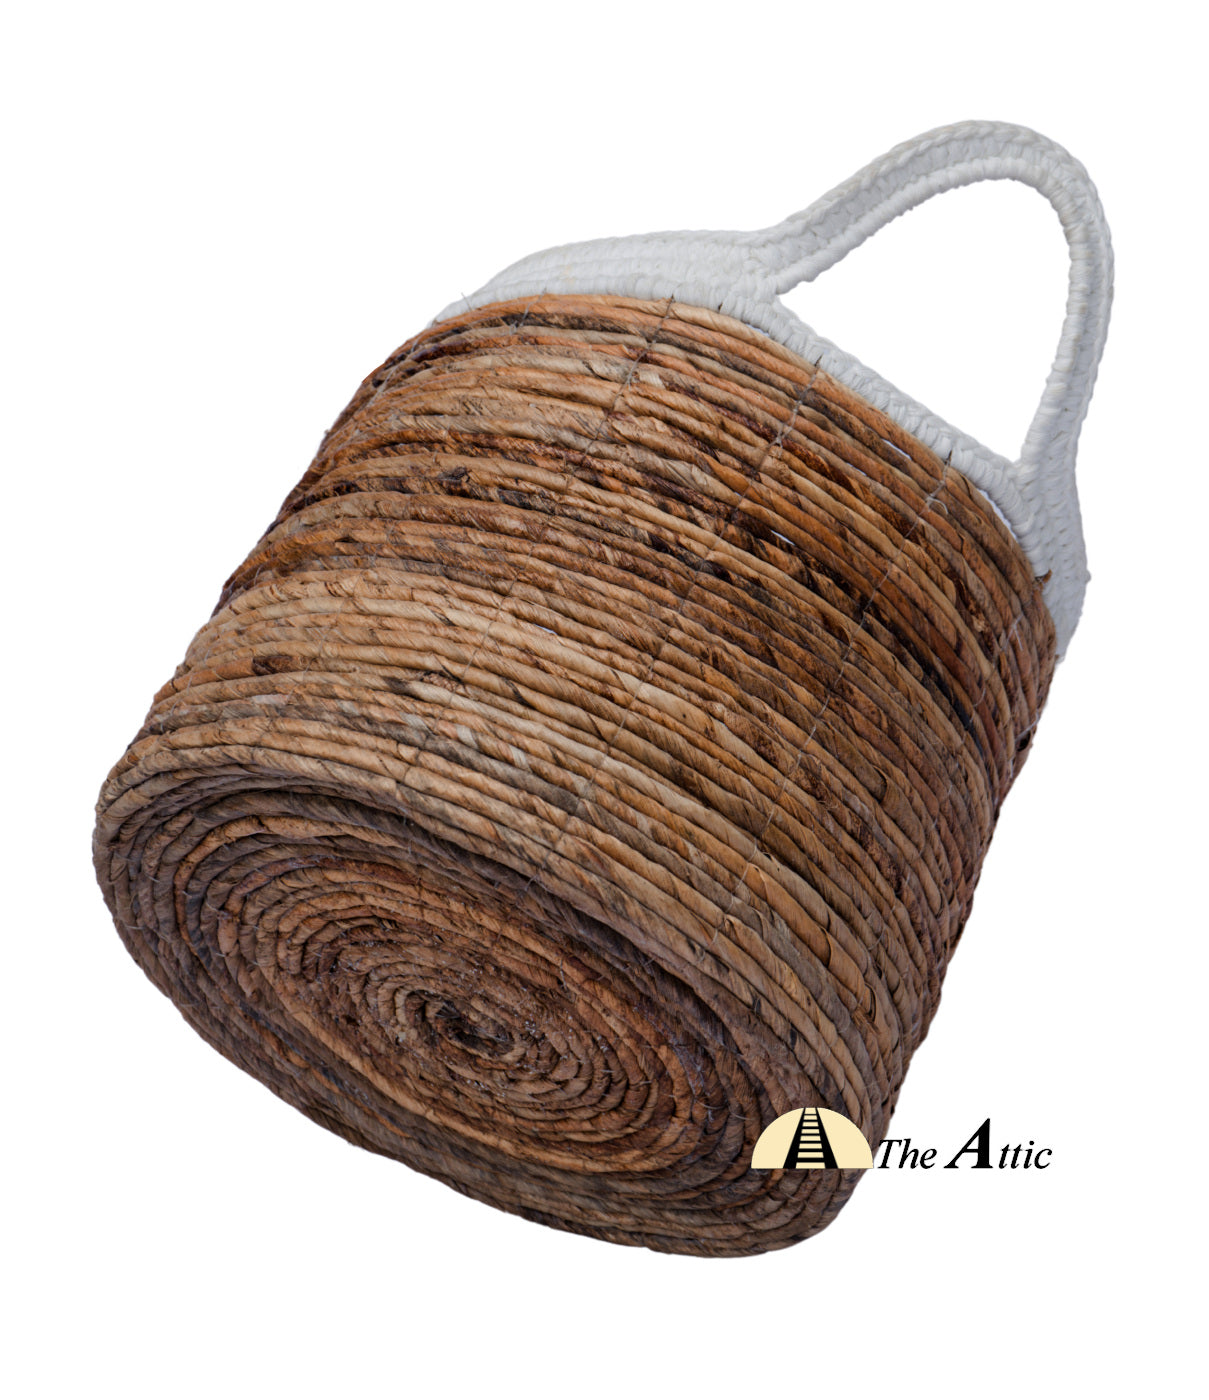 Cyprus 2-tone Woven Basket with Handles, White & Natural